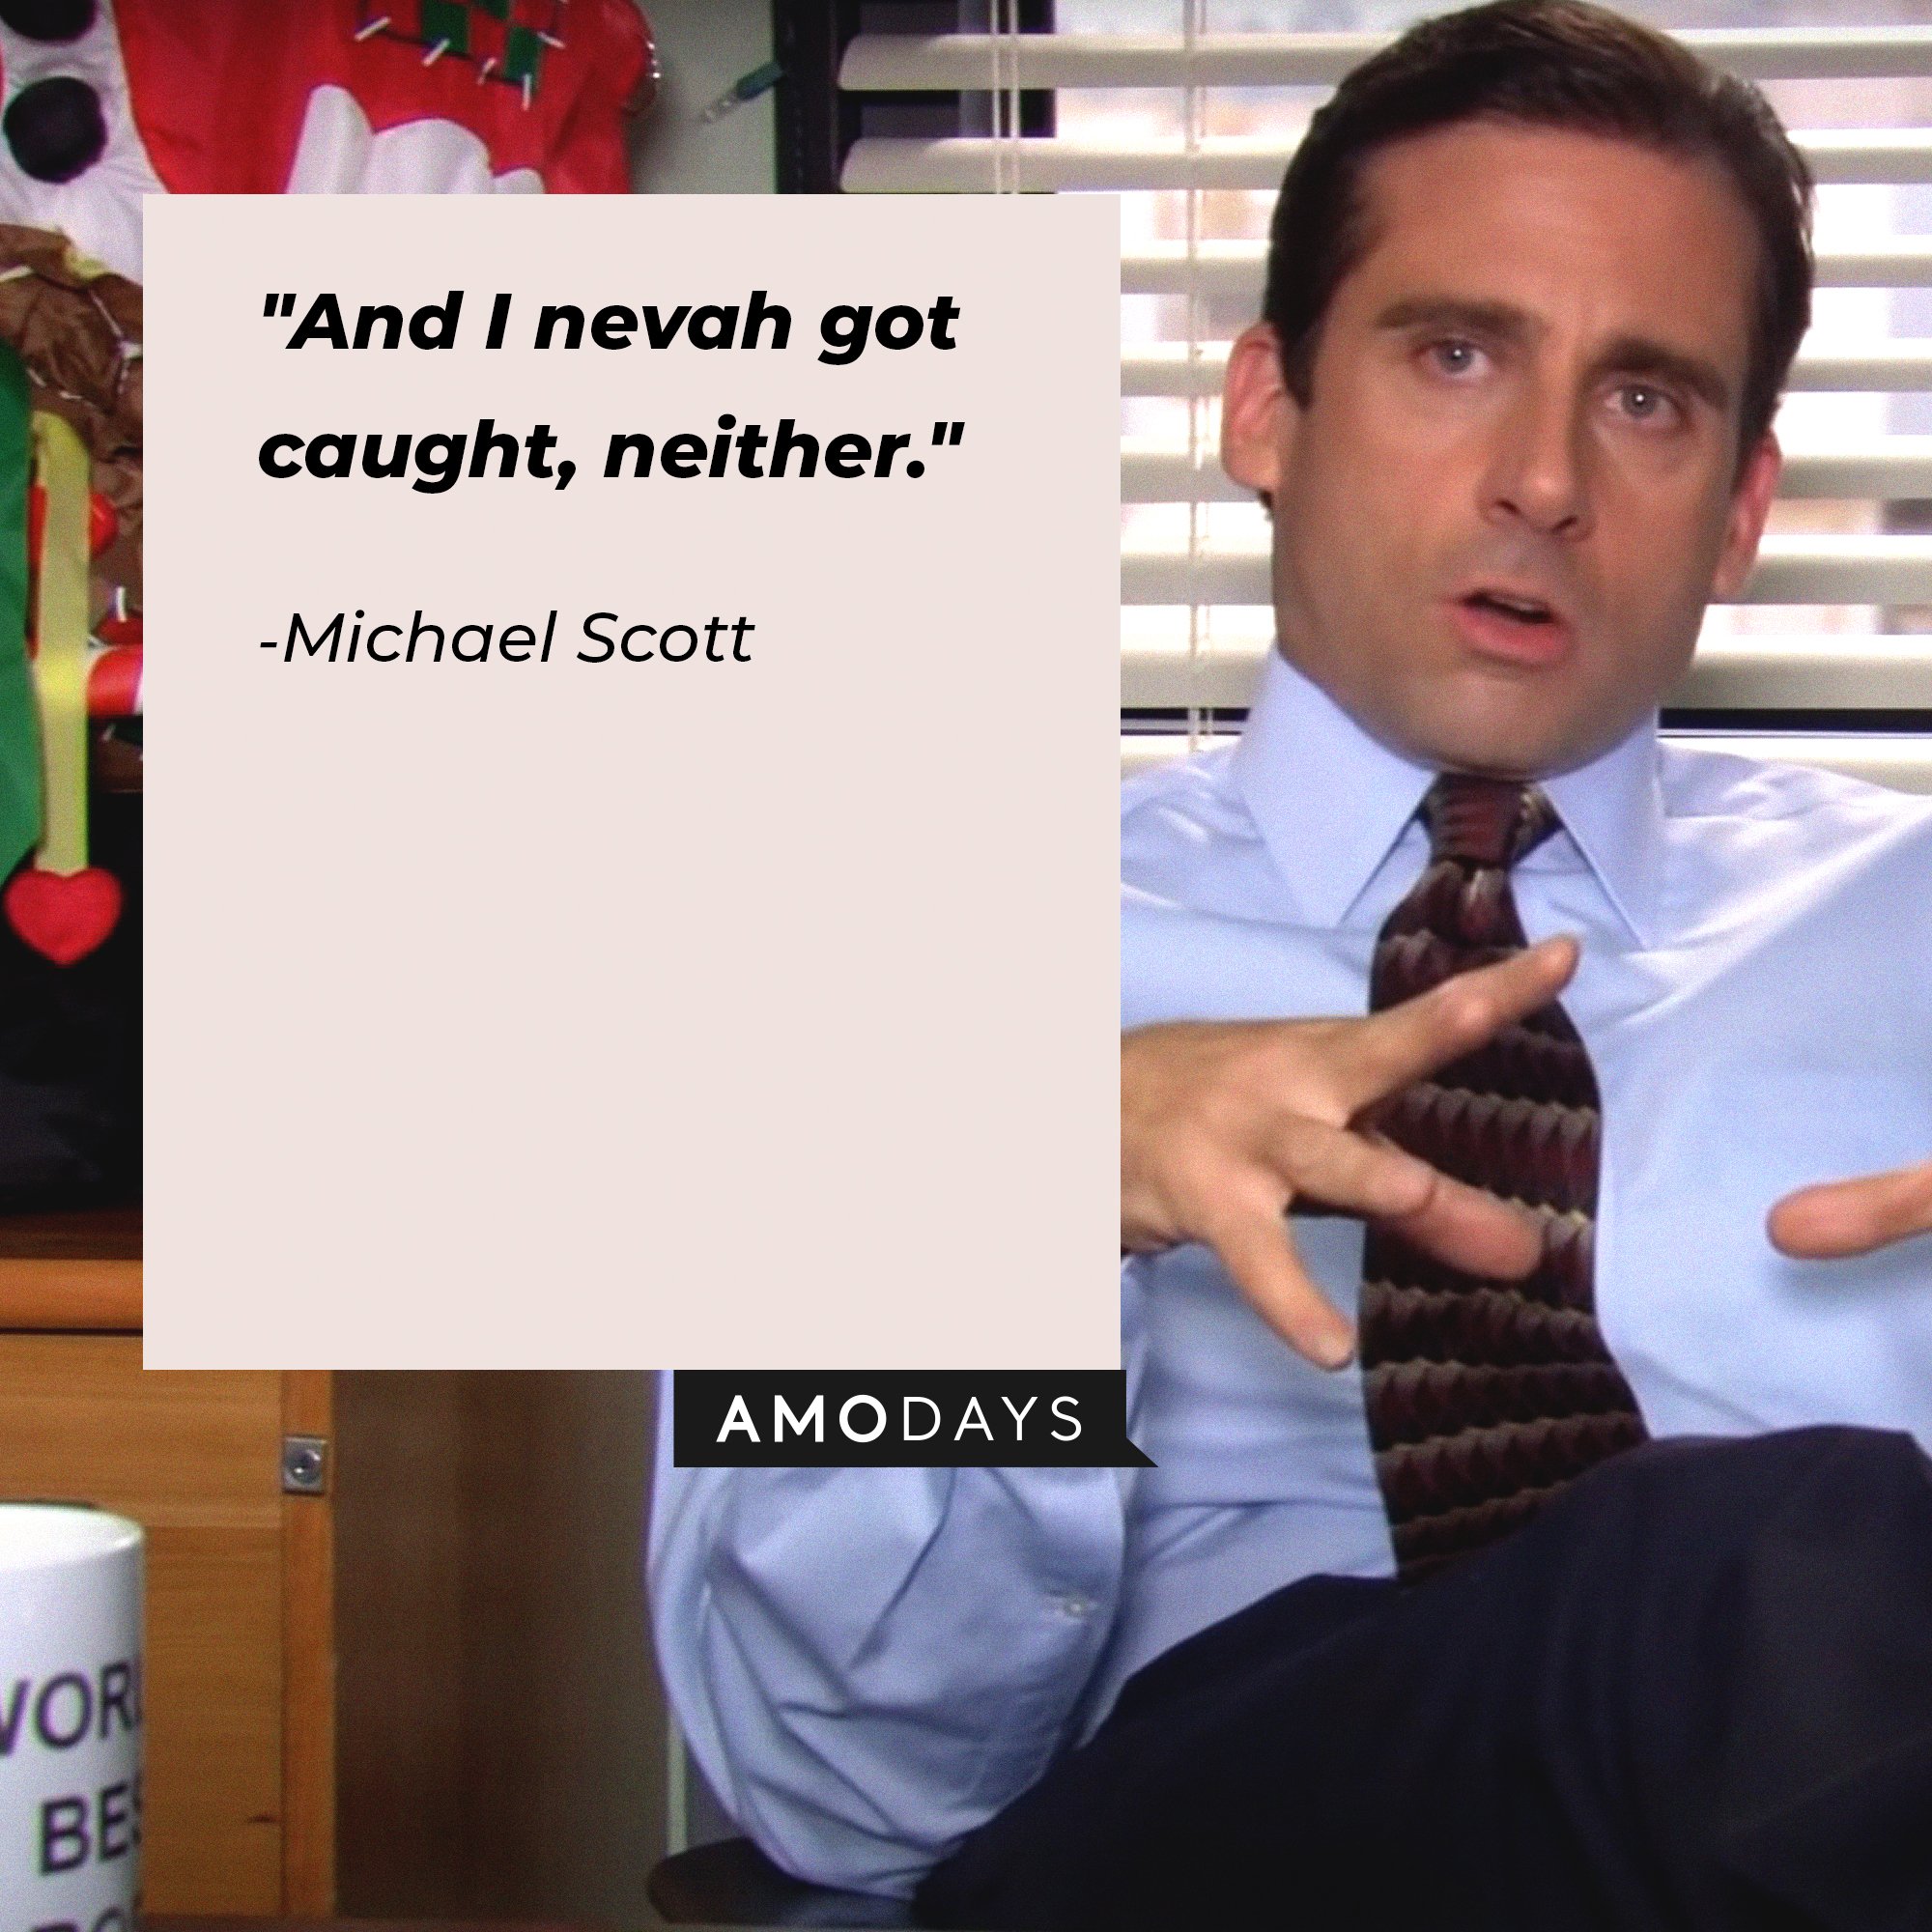 Michael Scott’s quote: "And I nevah got caught, neither." | Image: AmoDays